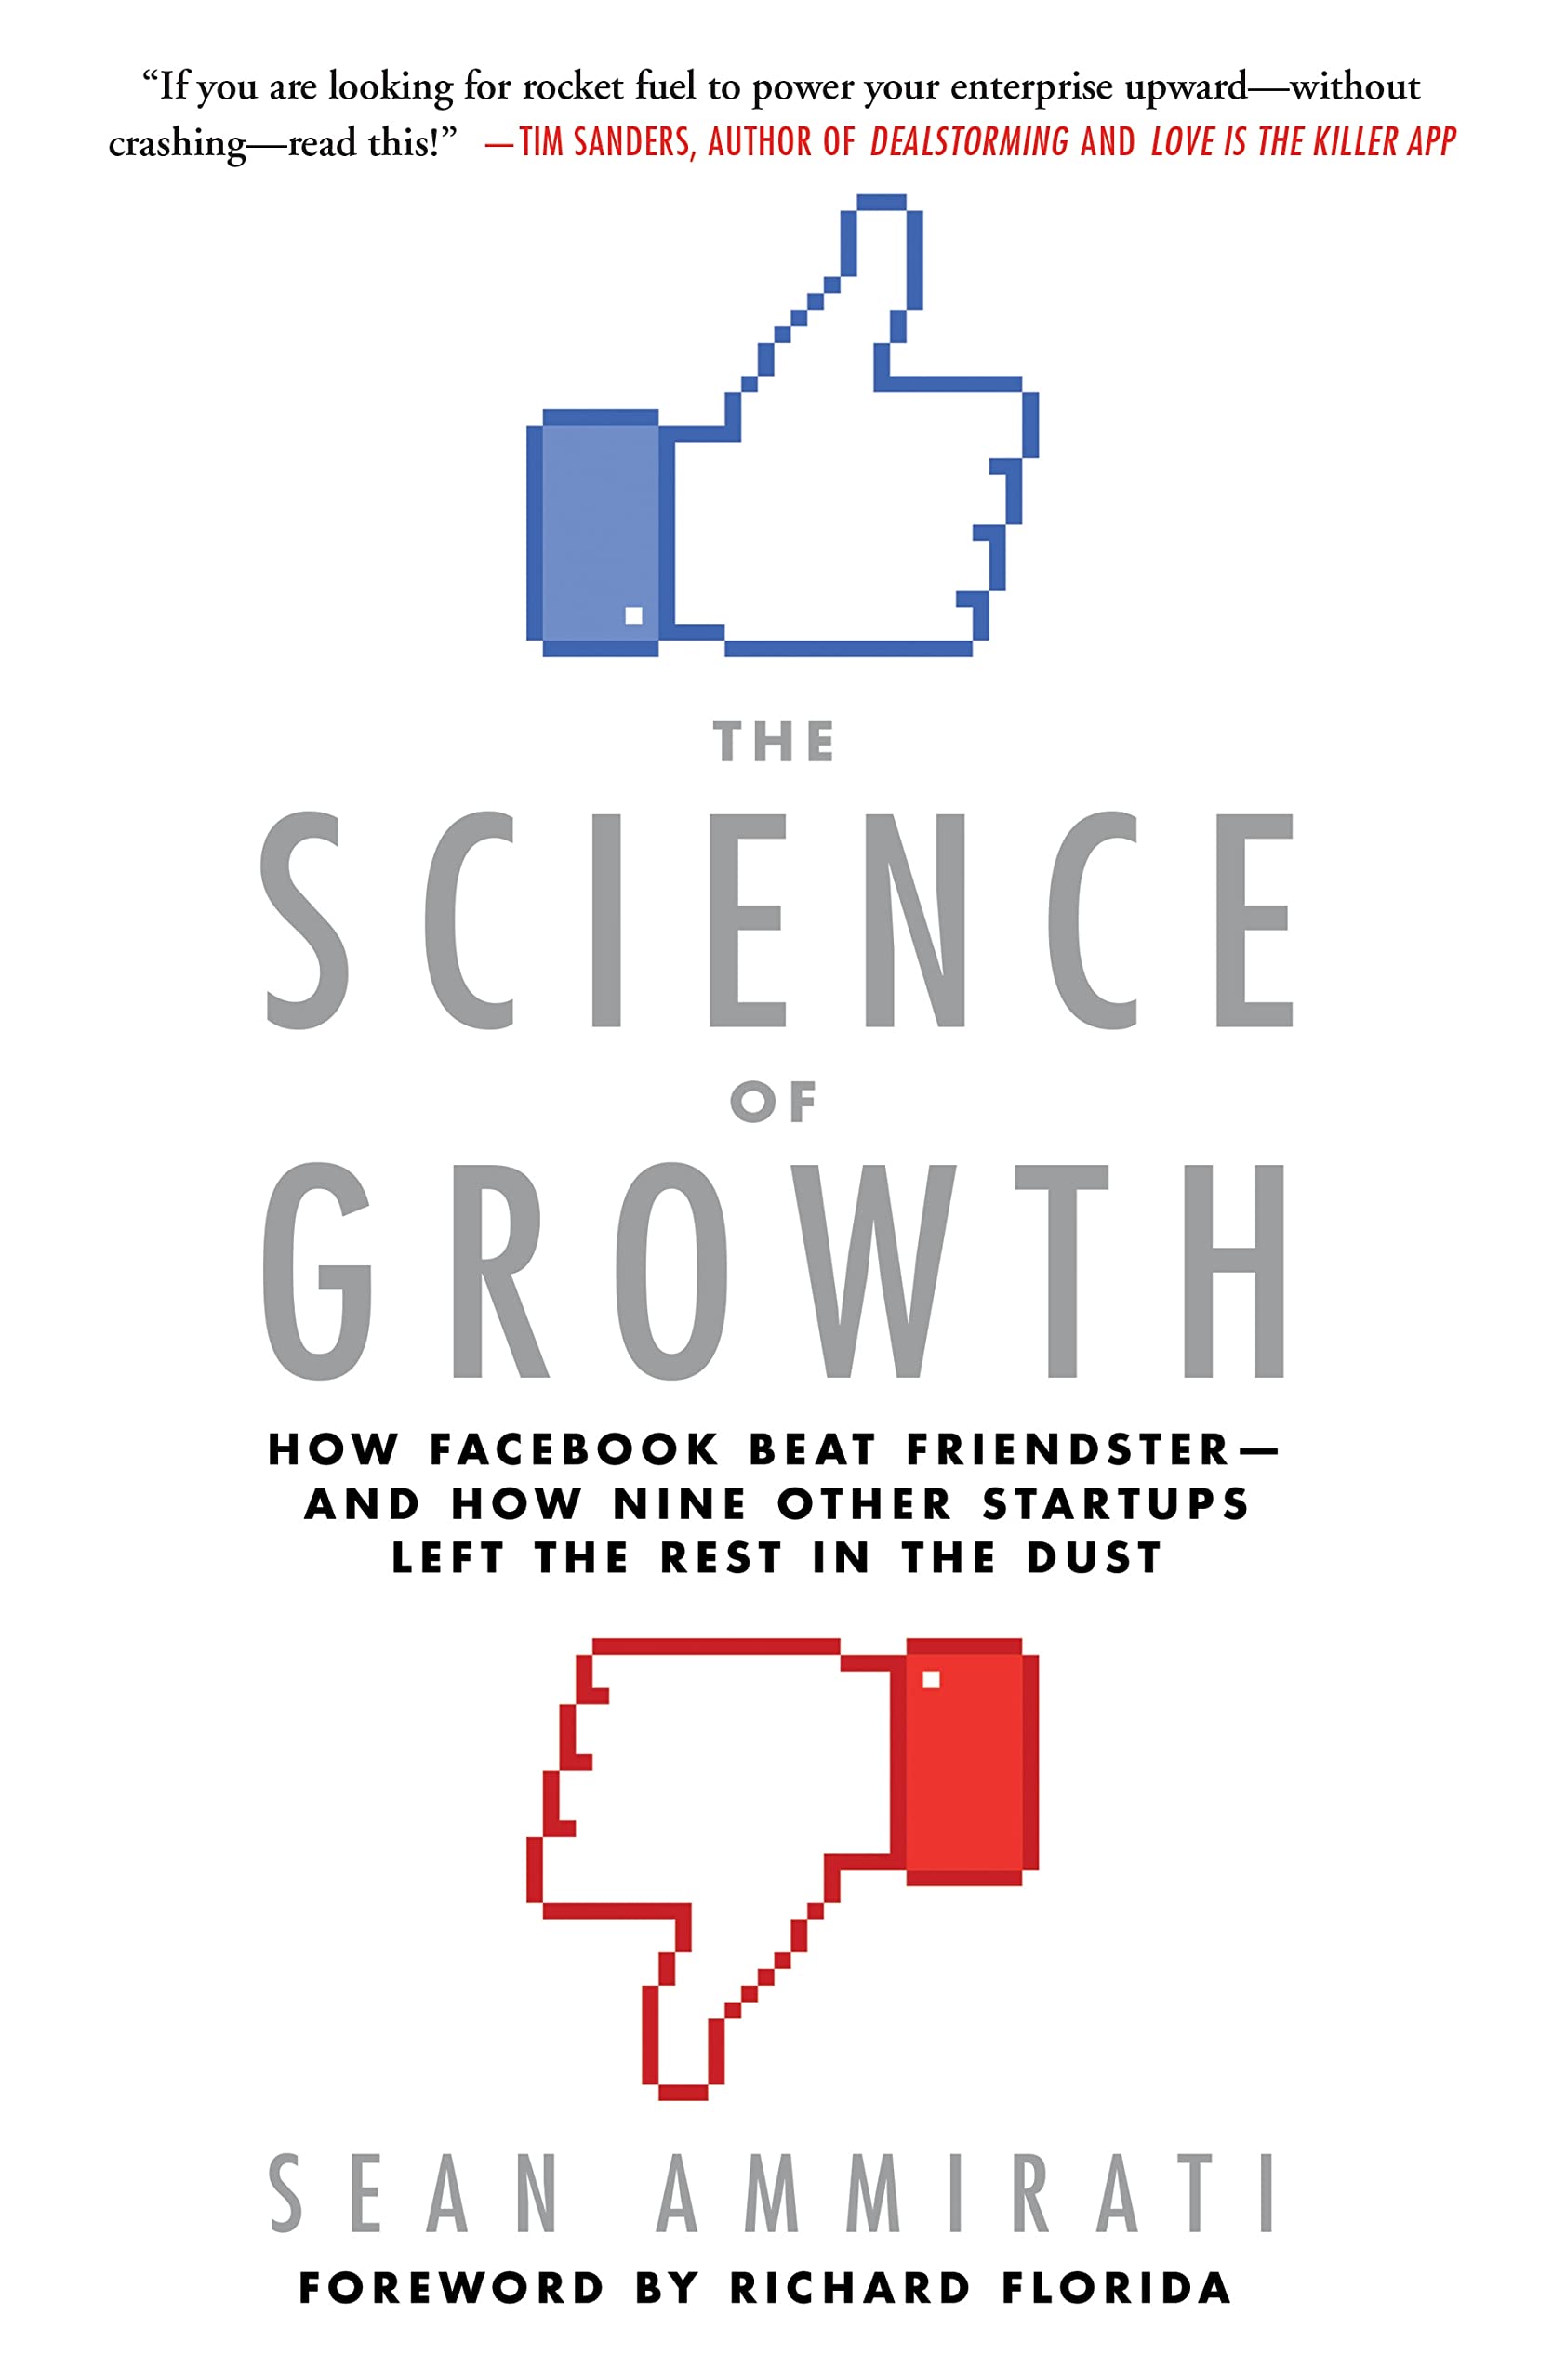 The Science of Growth: How Facebook Beat Friendster - and How Nine Other Startups Left the Rest in the Dust